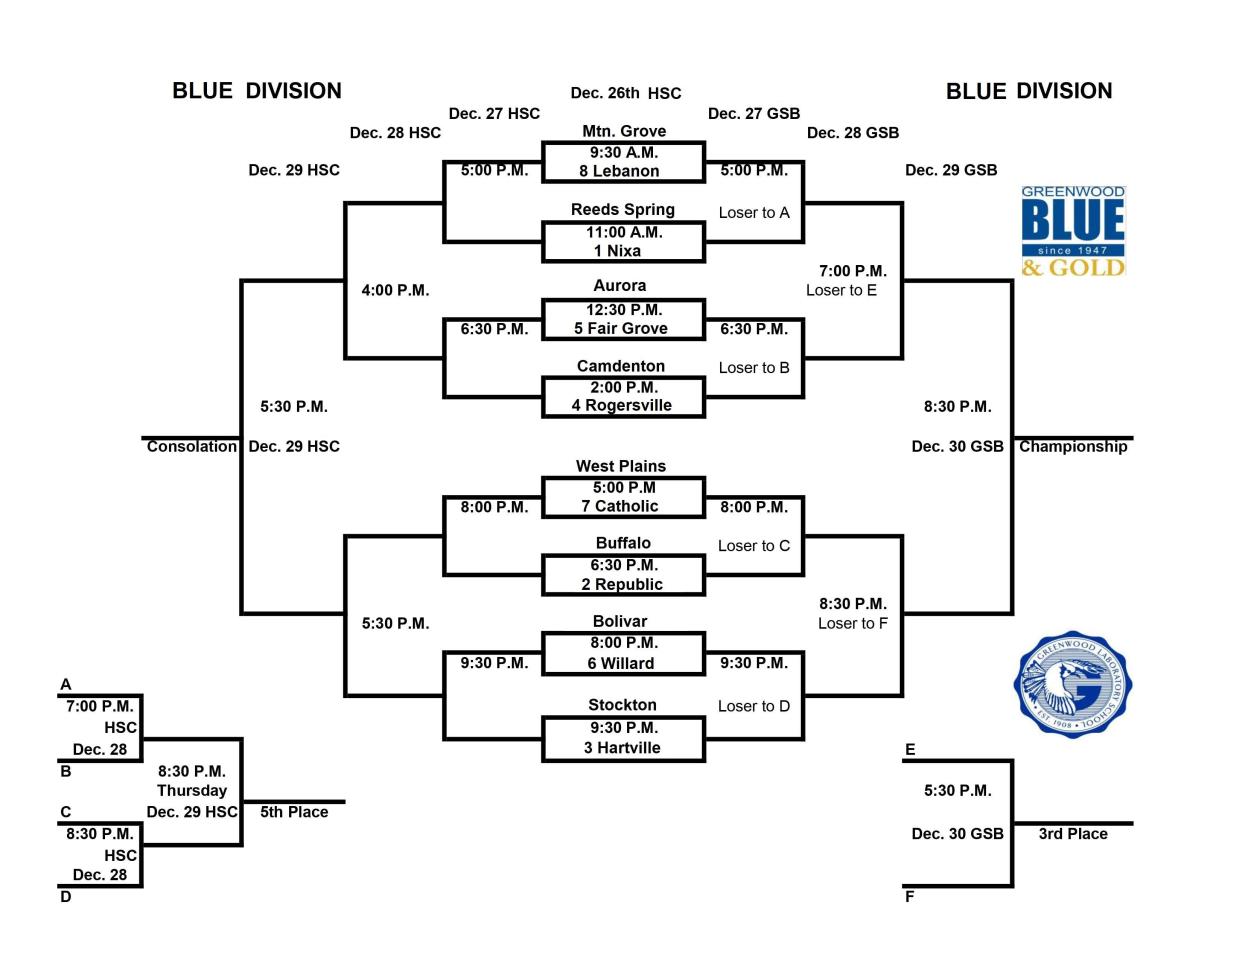 The Blue Division tournament bracket for the 2023 Blue and Gold Tournament.